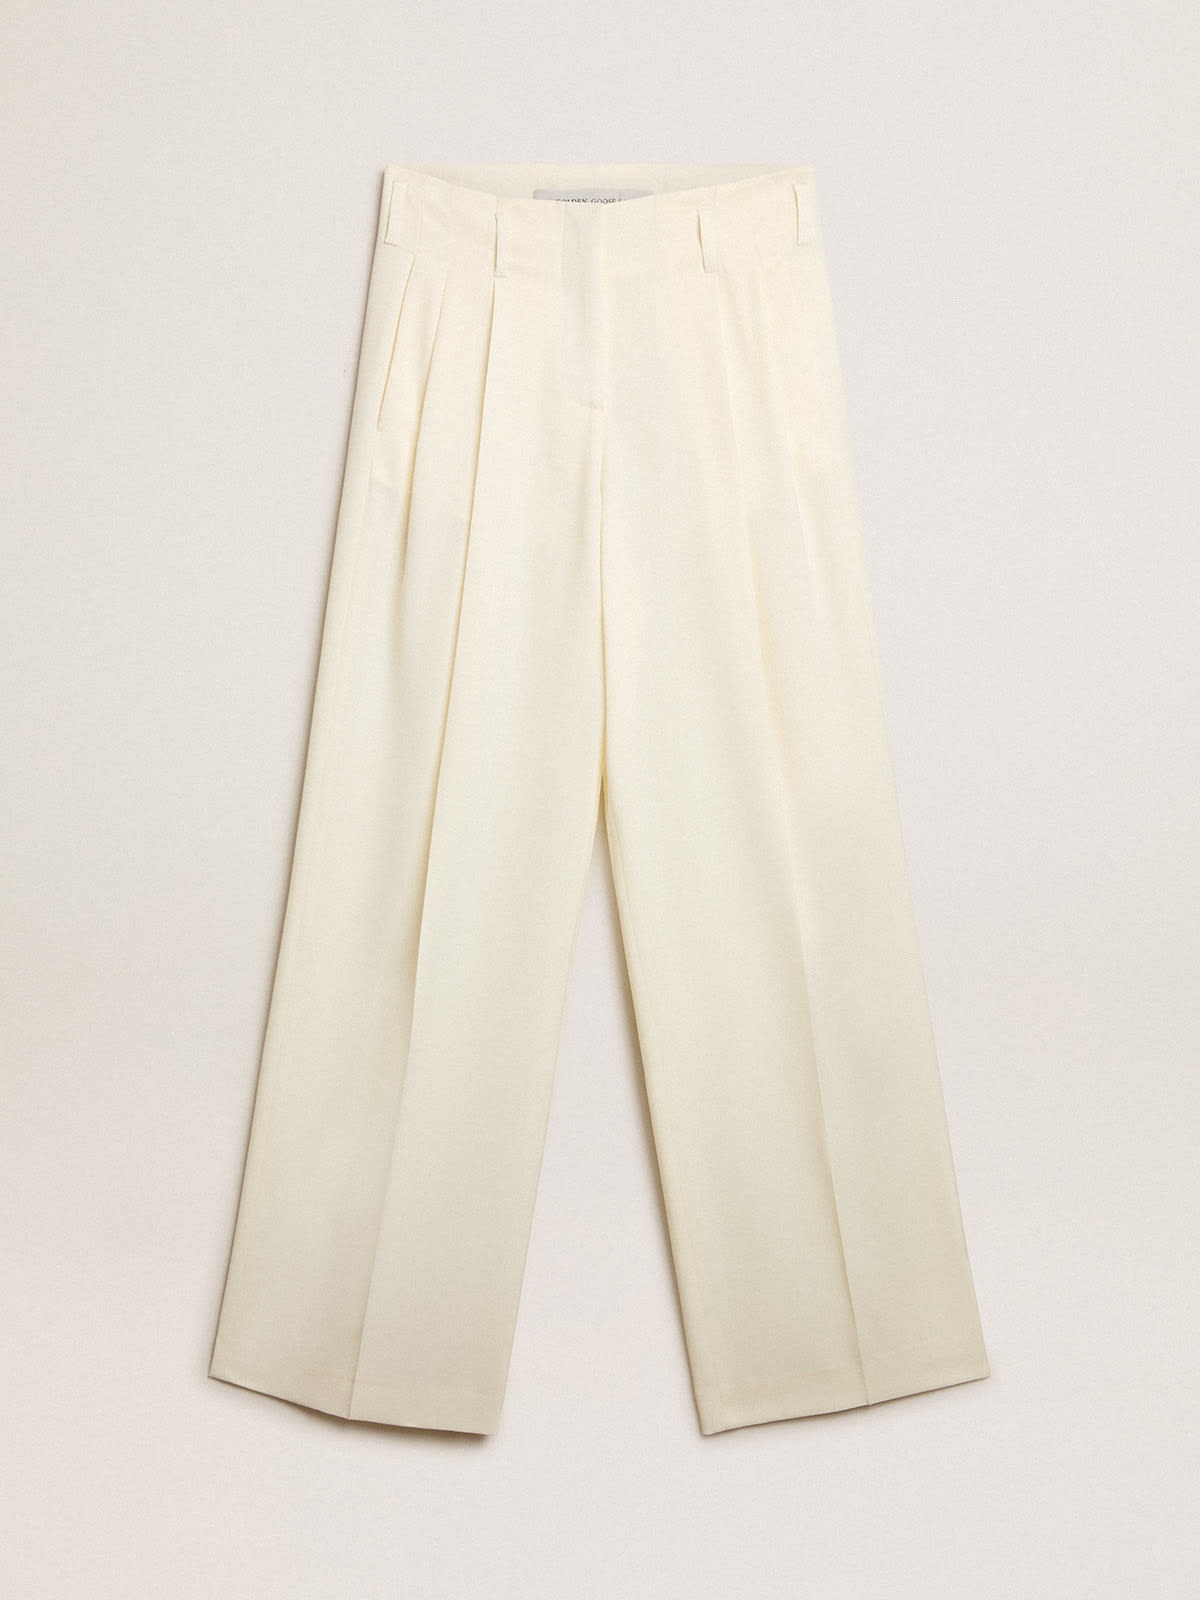 Women's joggers in aged white wool blend - 1